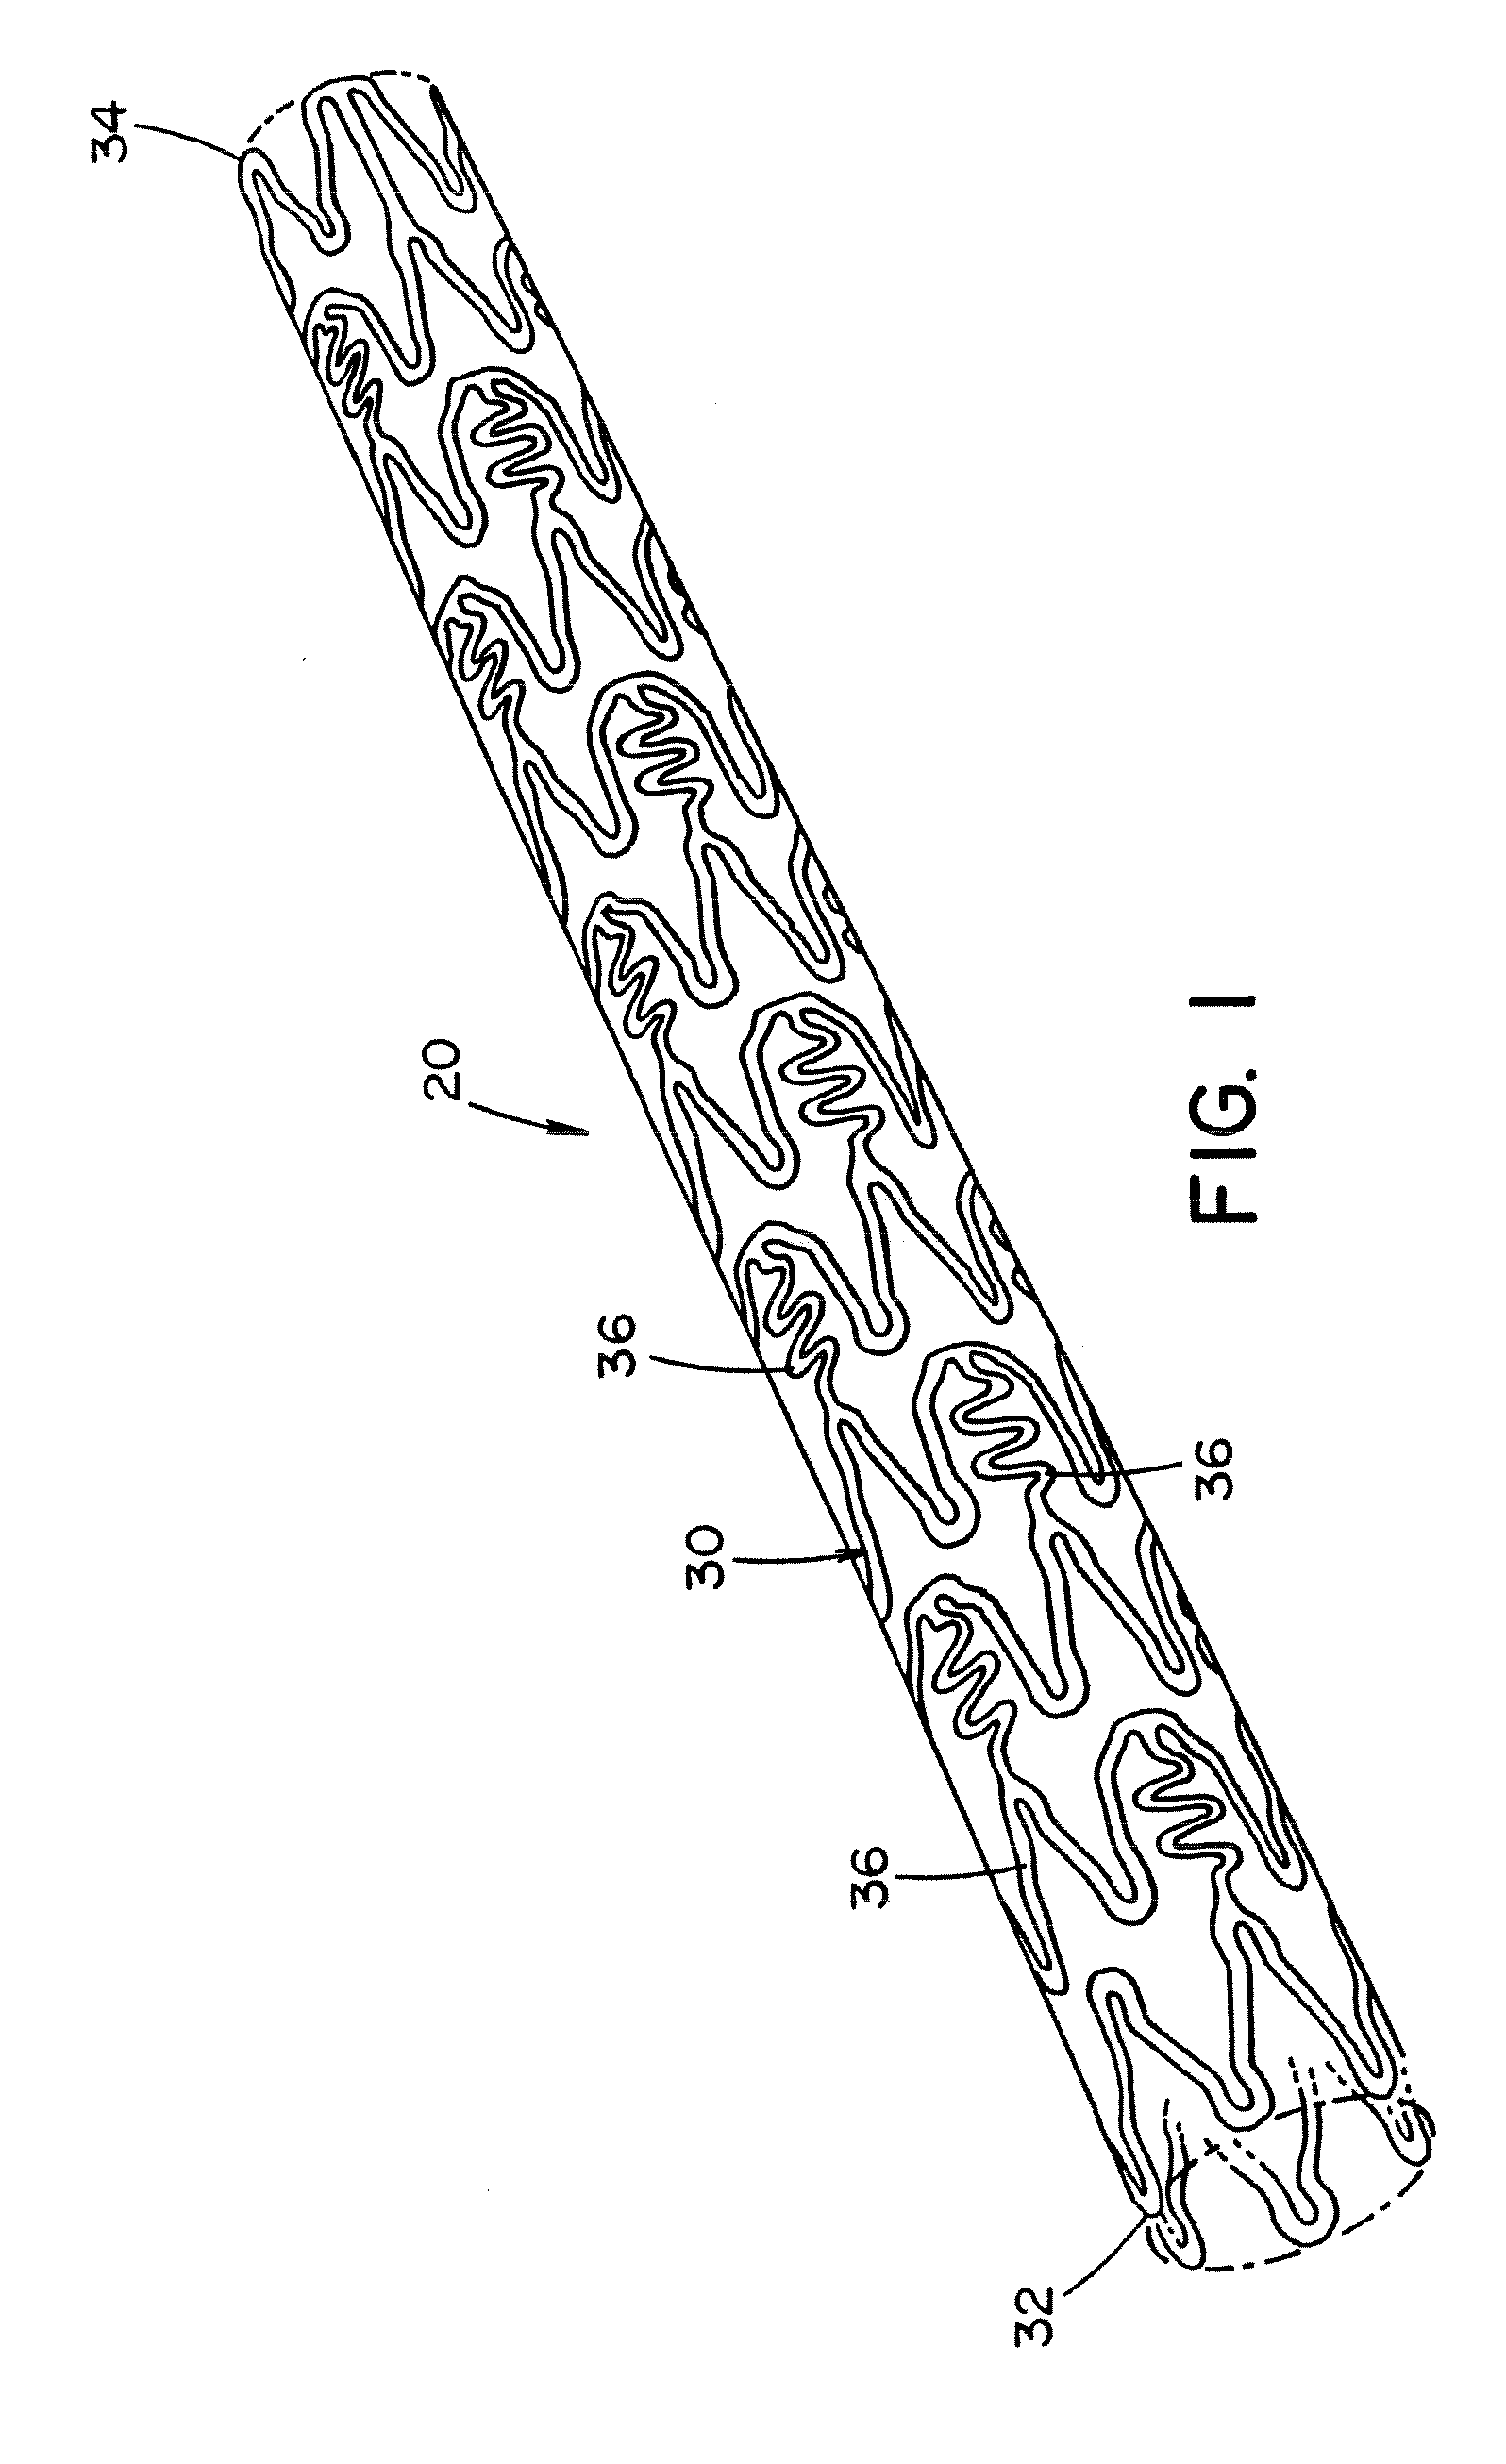 Method for forming a tubular medical device